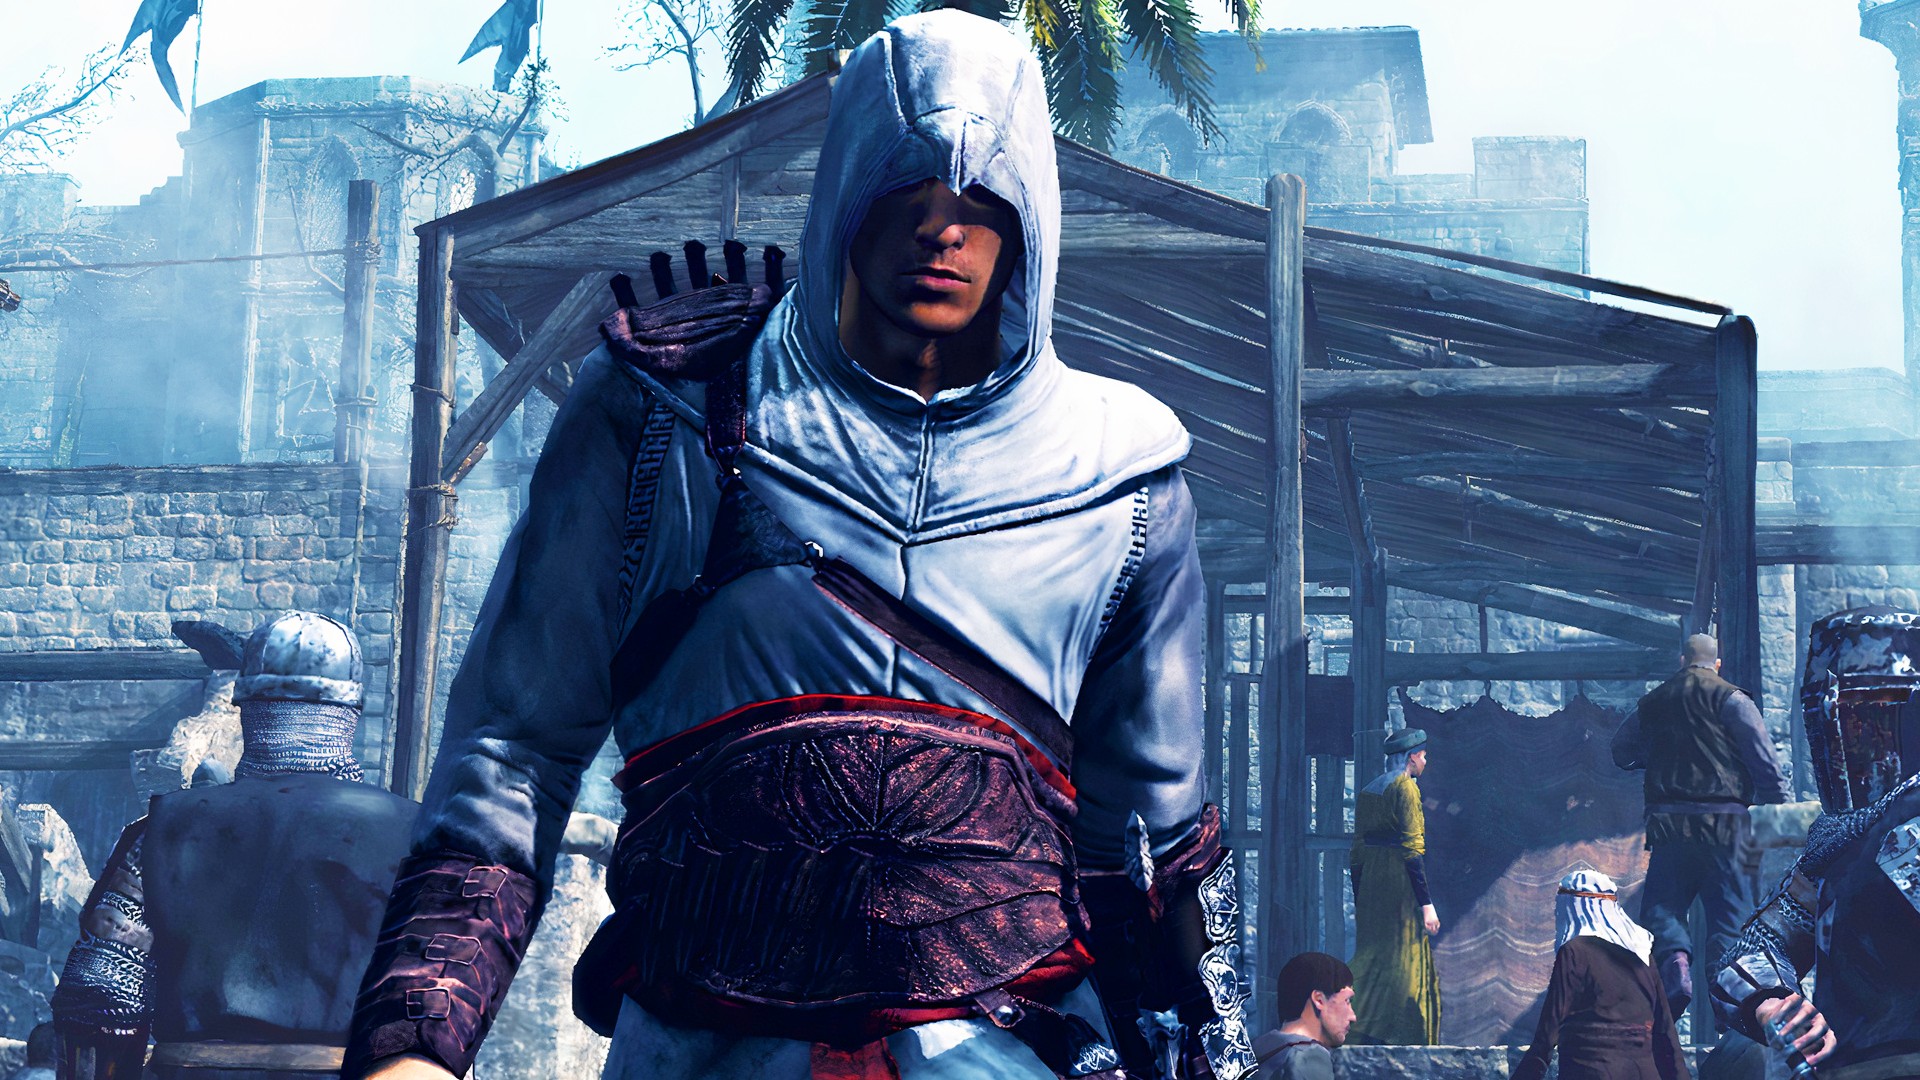 Assassin's Creed 1 remake hinted at by Rift leaks